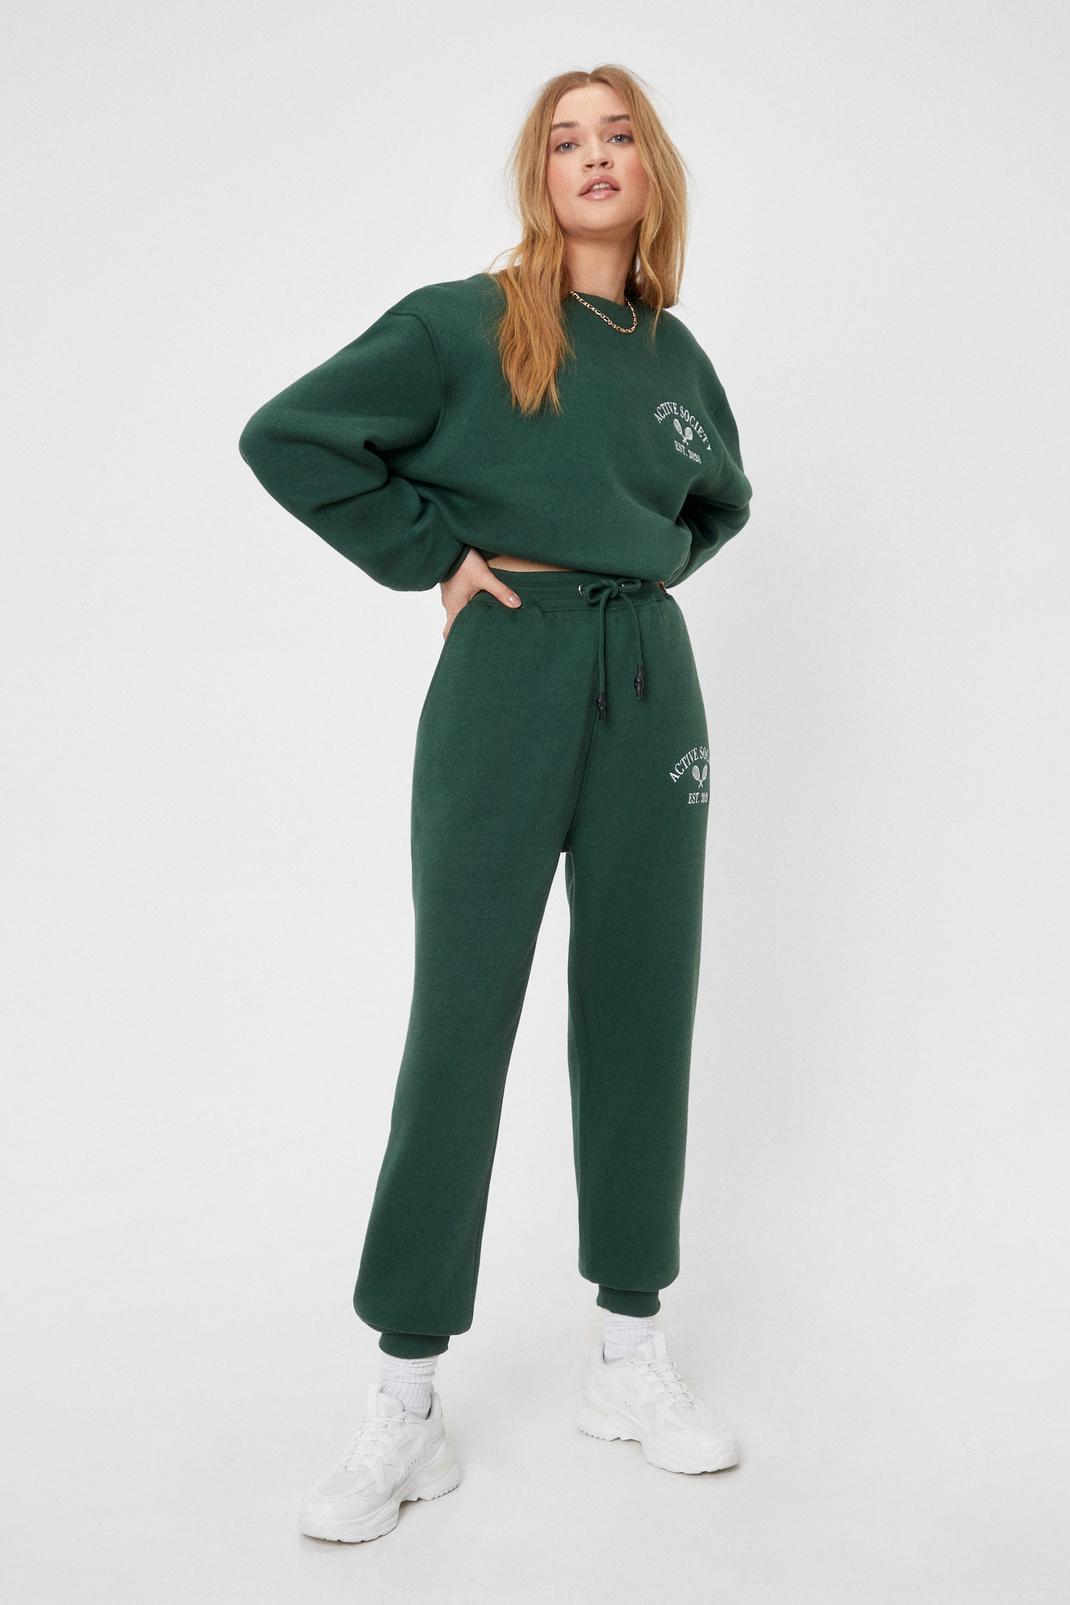 Green Active Society Est. 2020 Embroidered Sweatpants image number 1